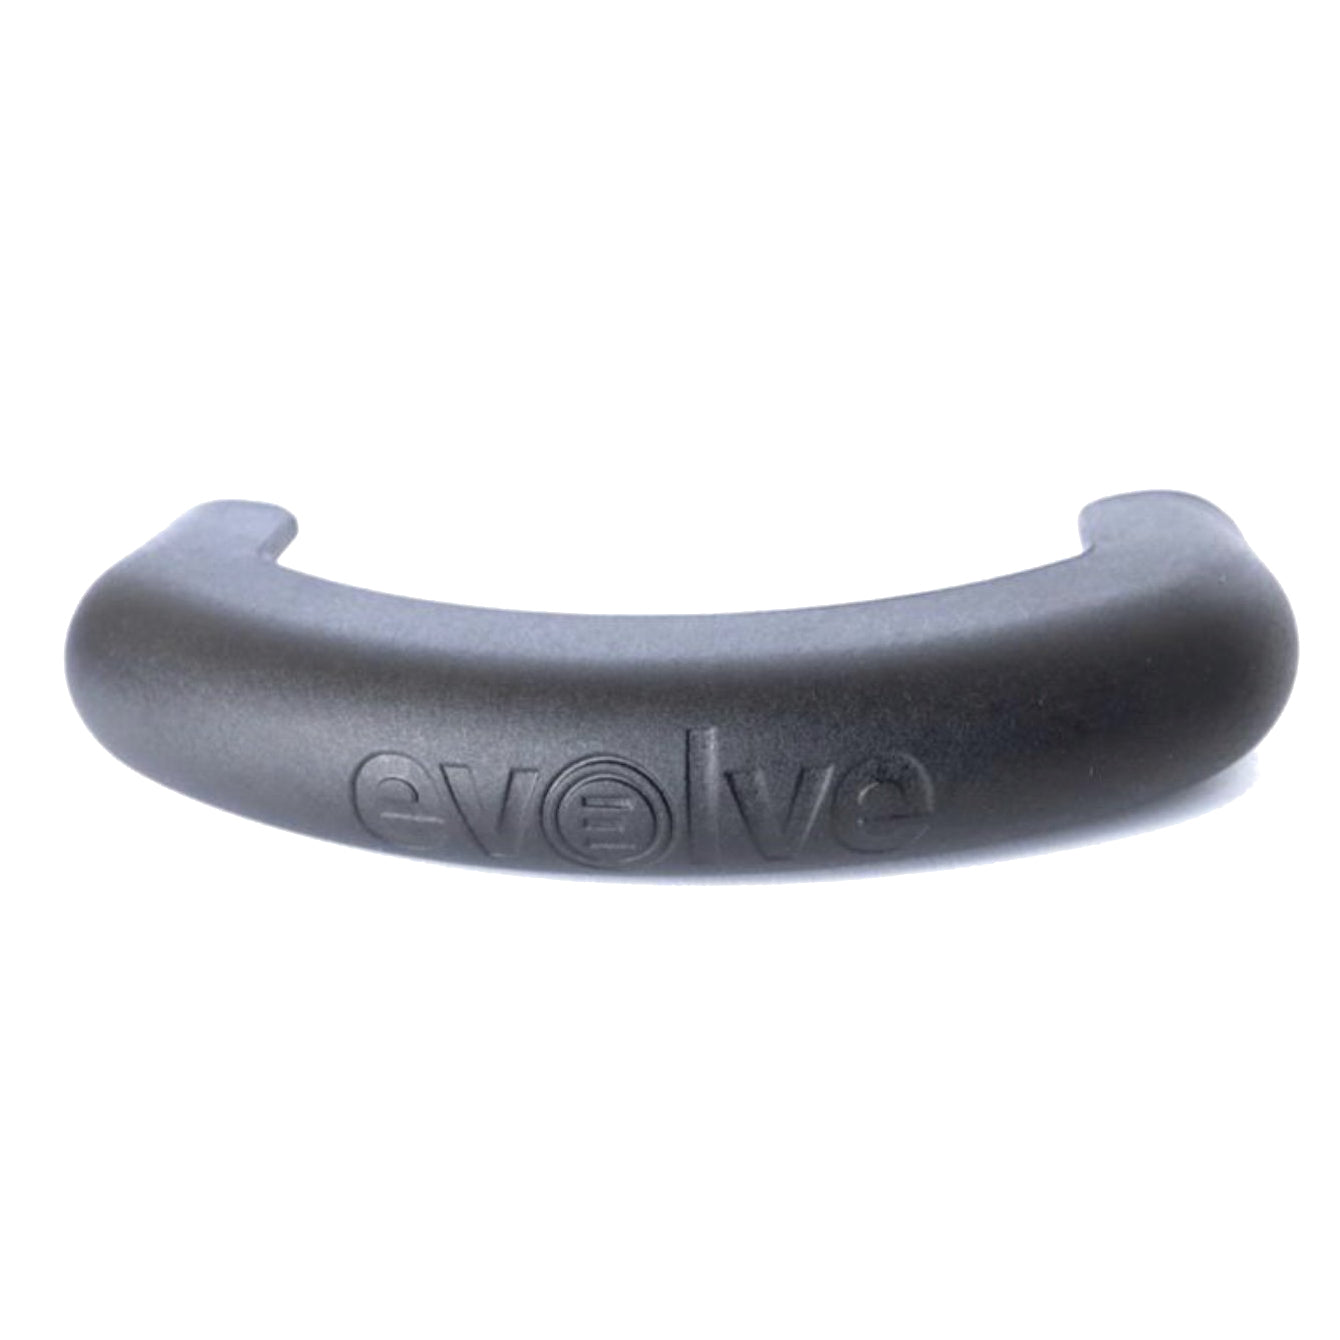 Nose bash Guard for GTR GTX electric skateboards by evolve 